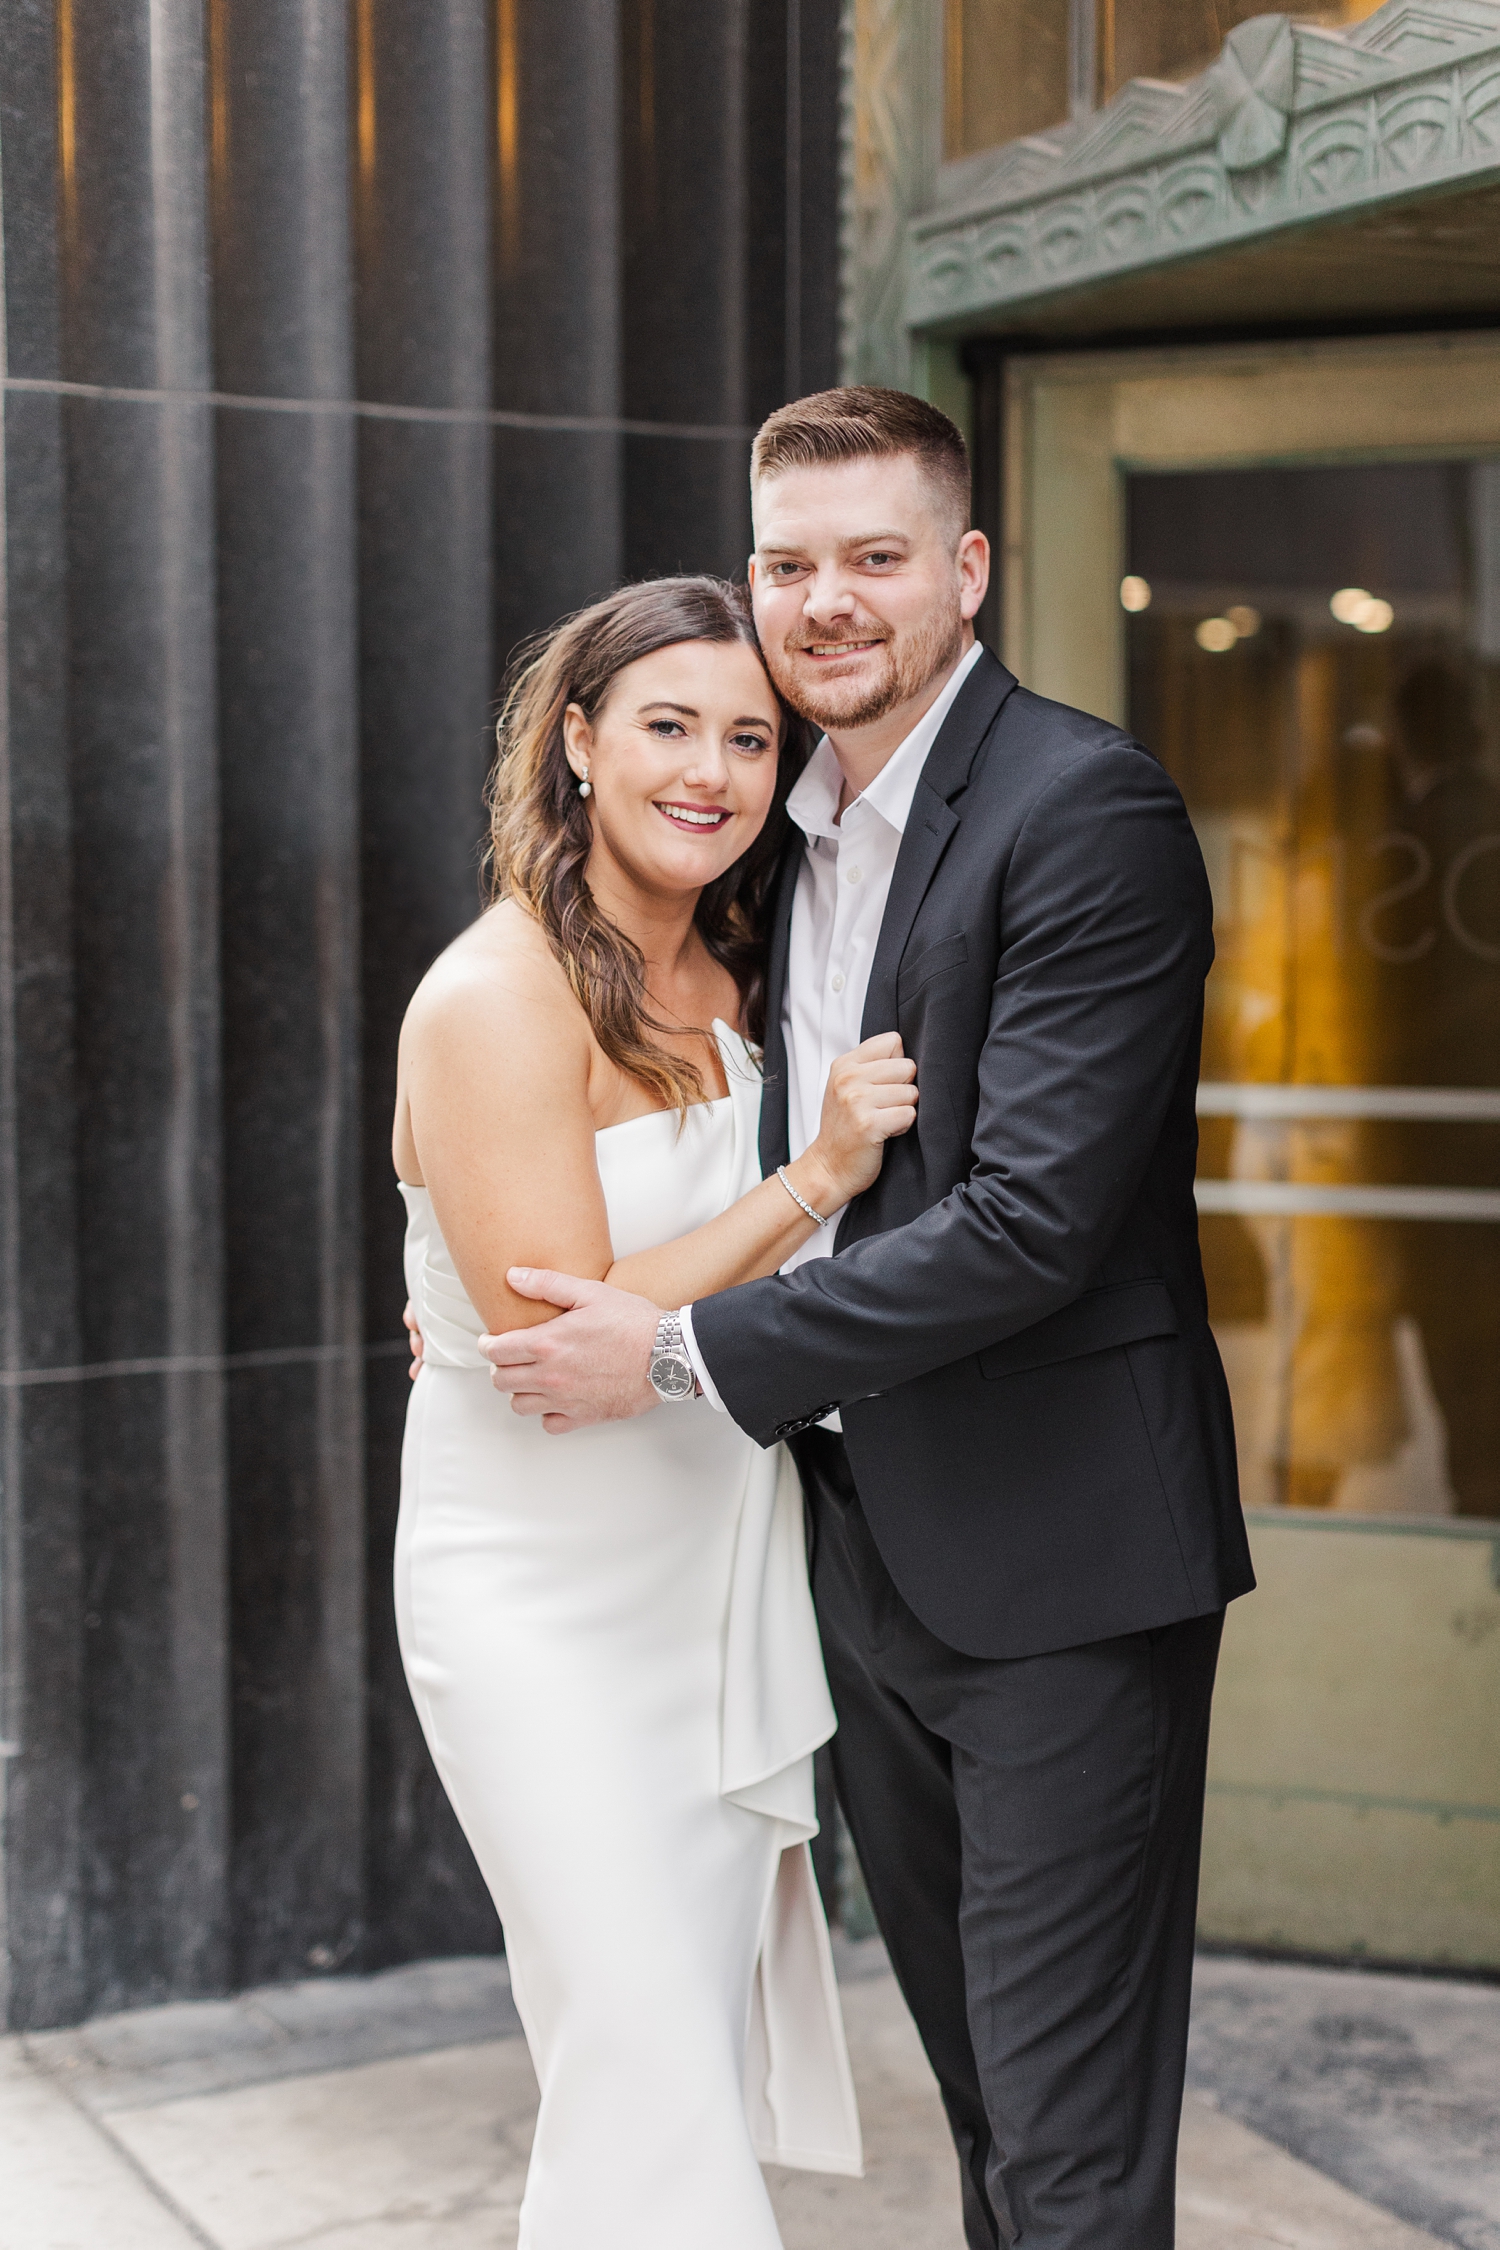 Jenna and Dustin embrace in front of a beautiful architectural building in downtown Des Moines, IA | CB Studio